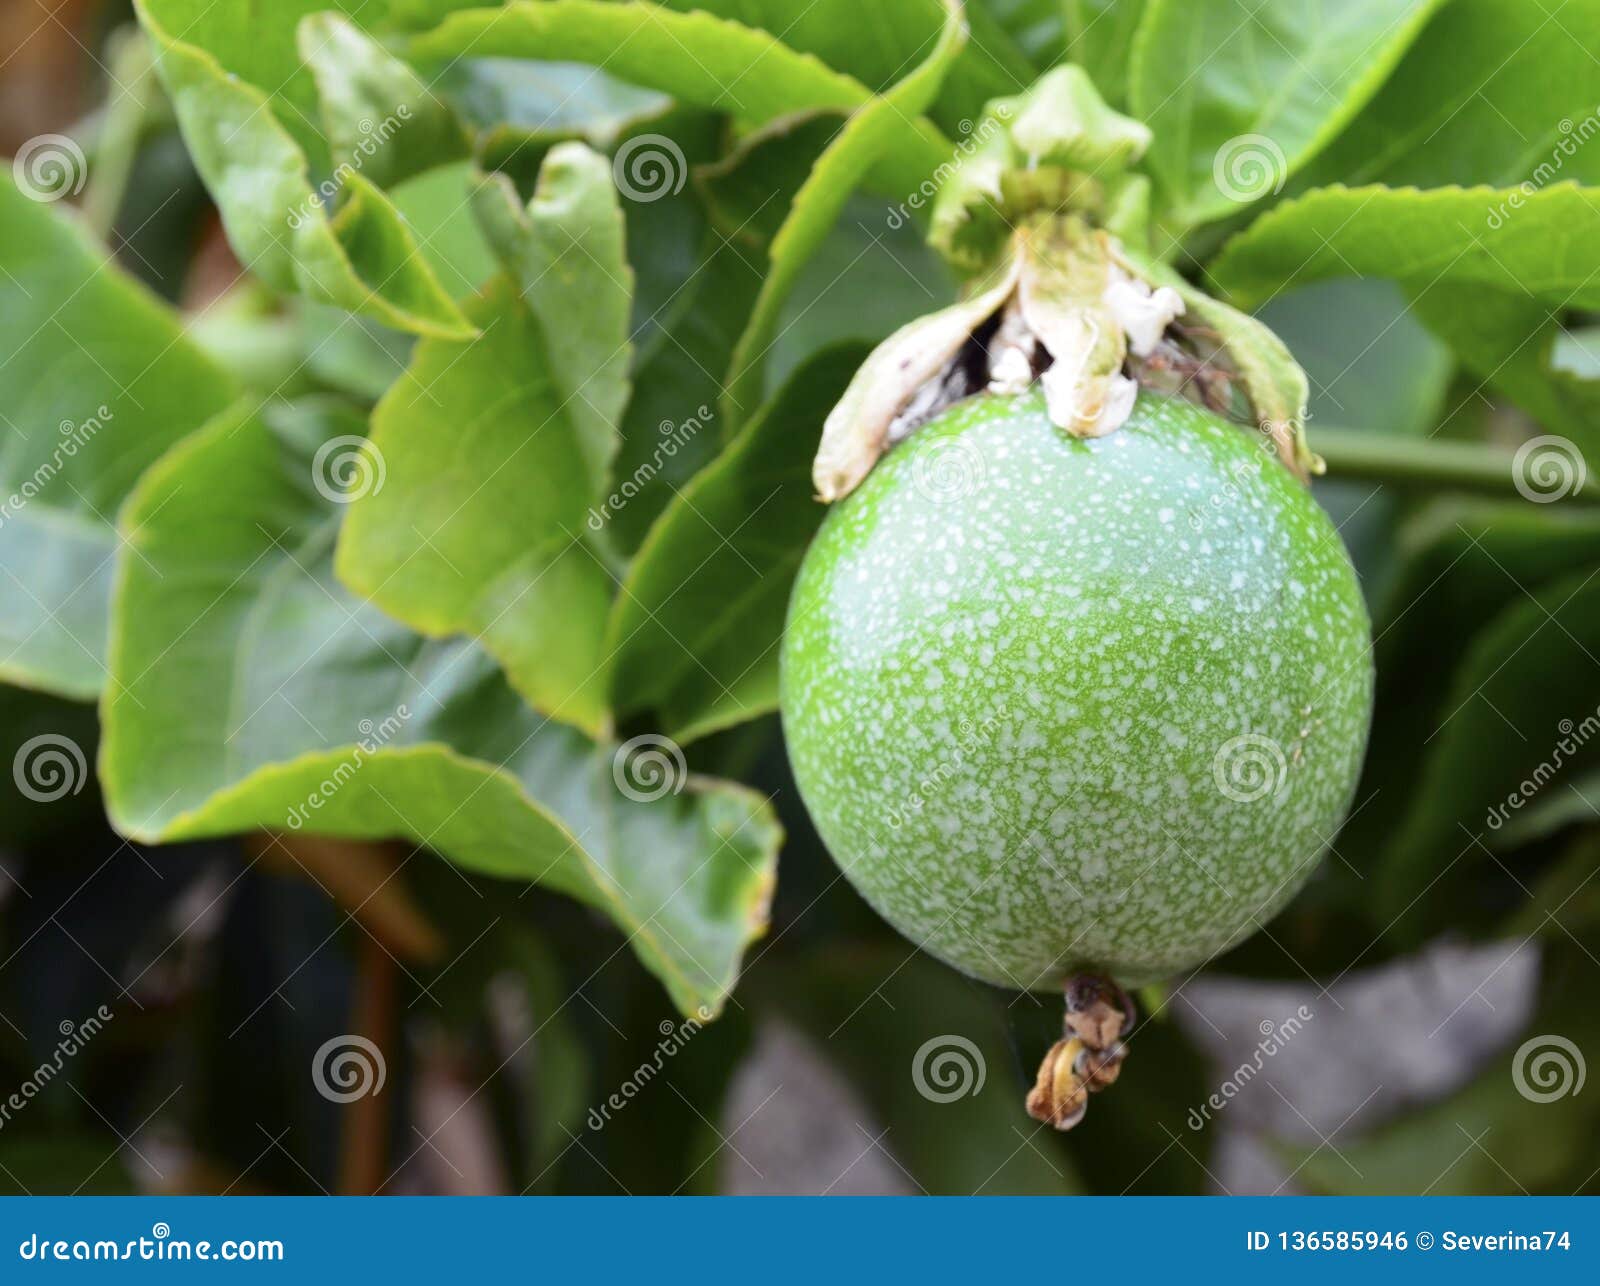 green passion fruit hanging on the tree in the garden.passiflora edulis also known as maracuya or parcha on the vine close up.